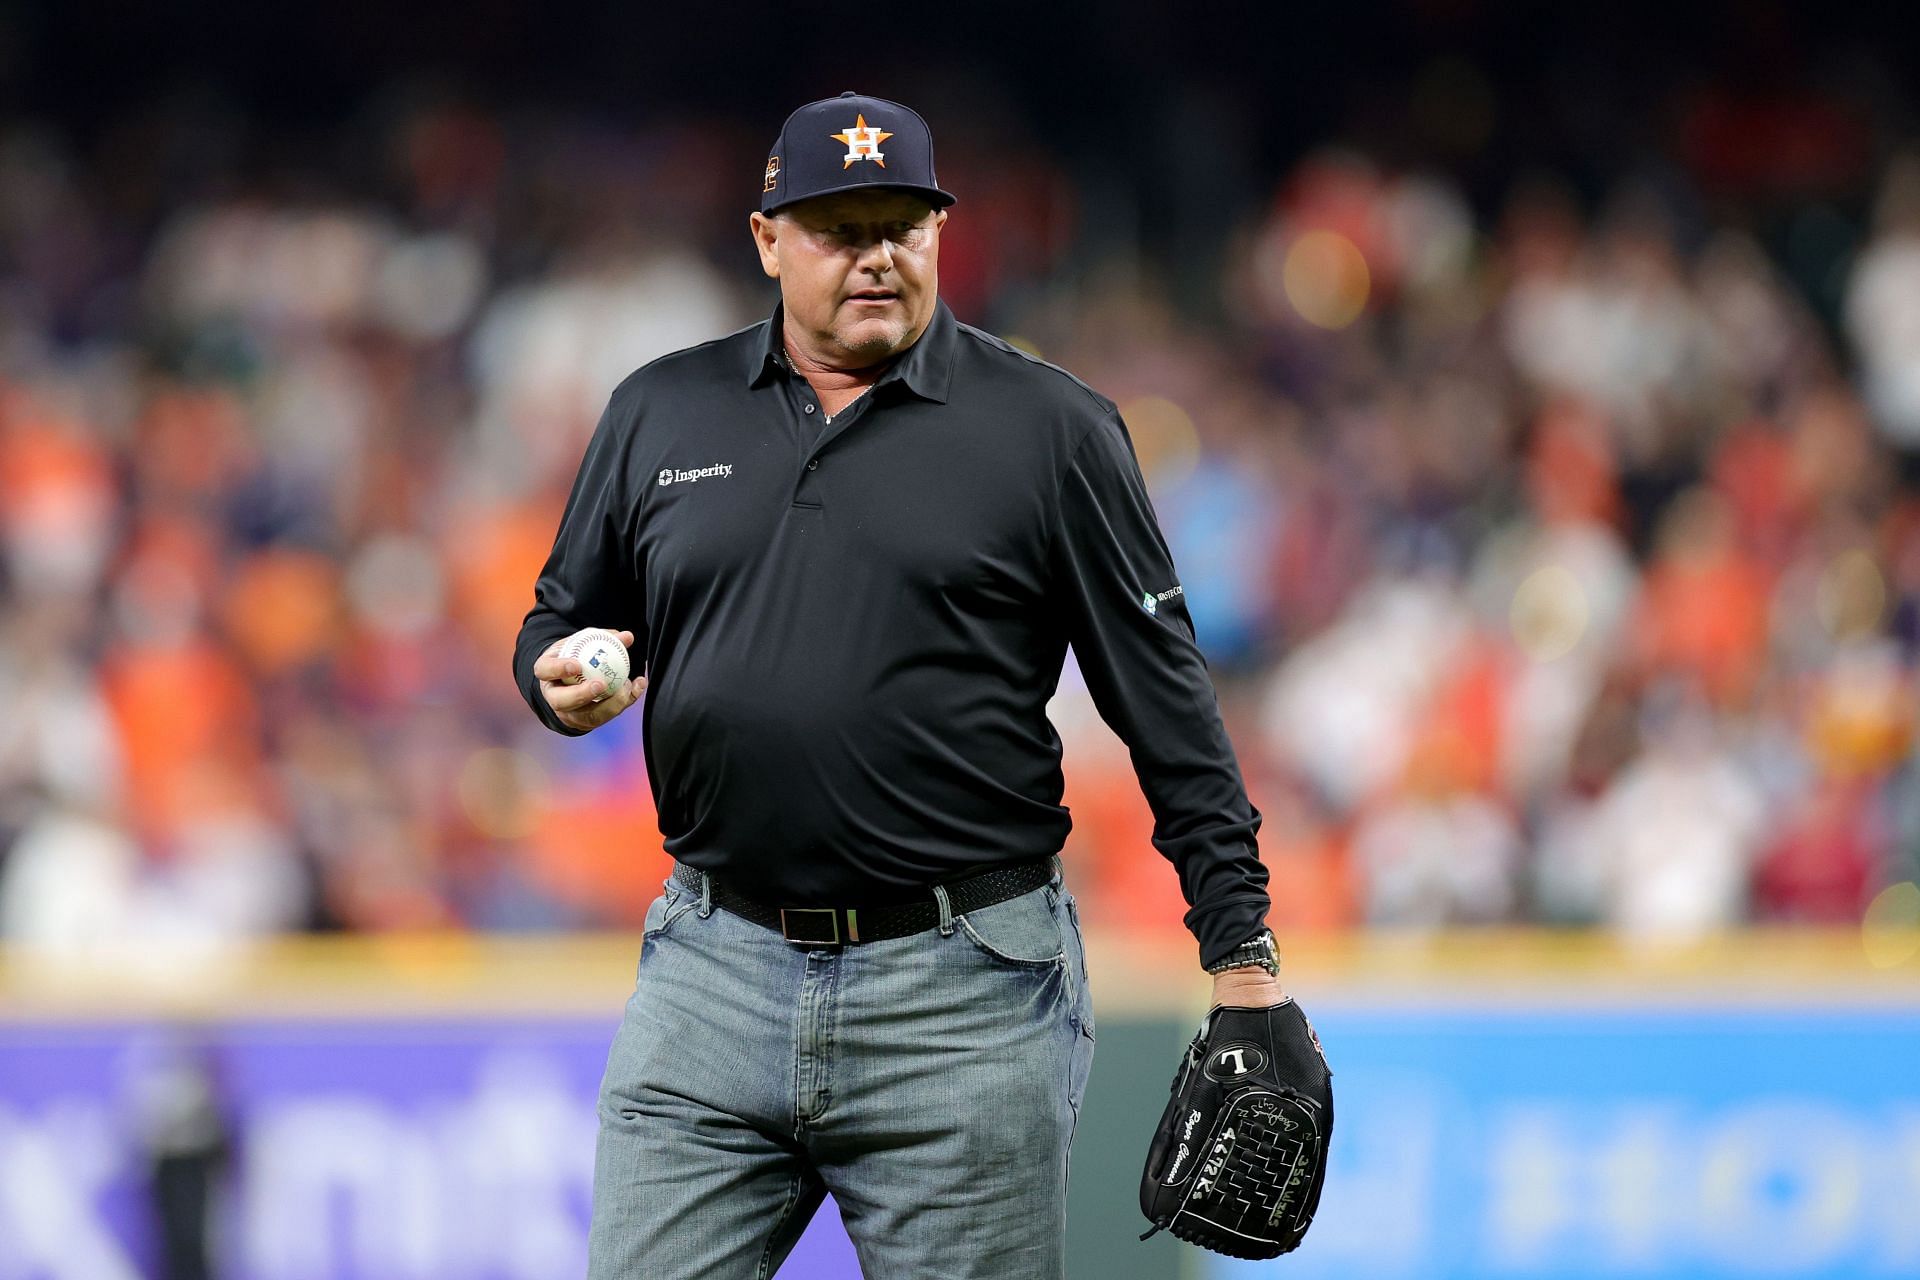 MLB fans react to Roger Clemens' appearance at Phillies training camp